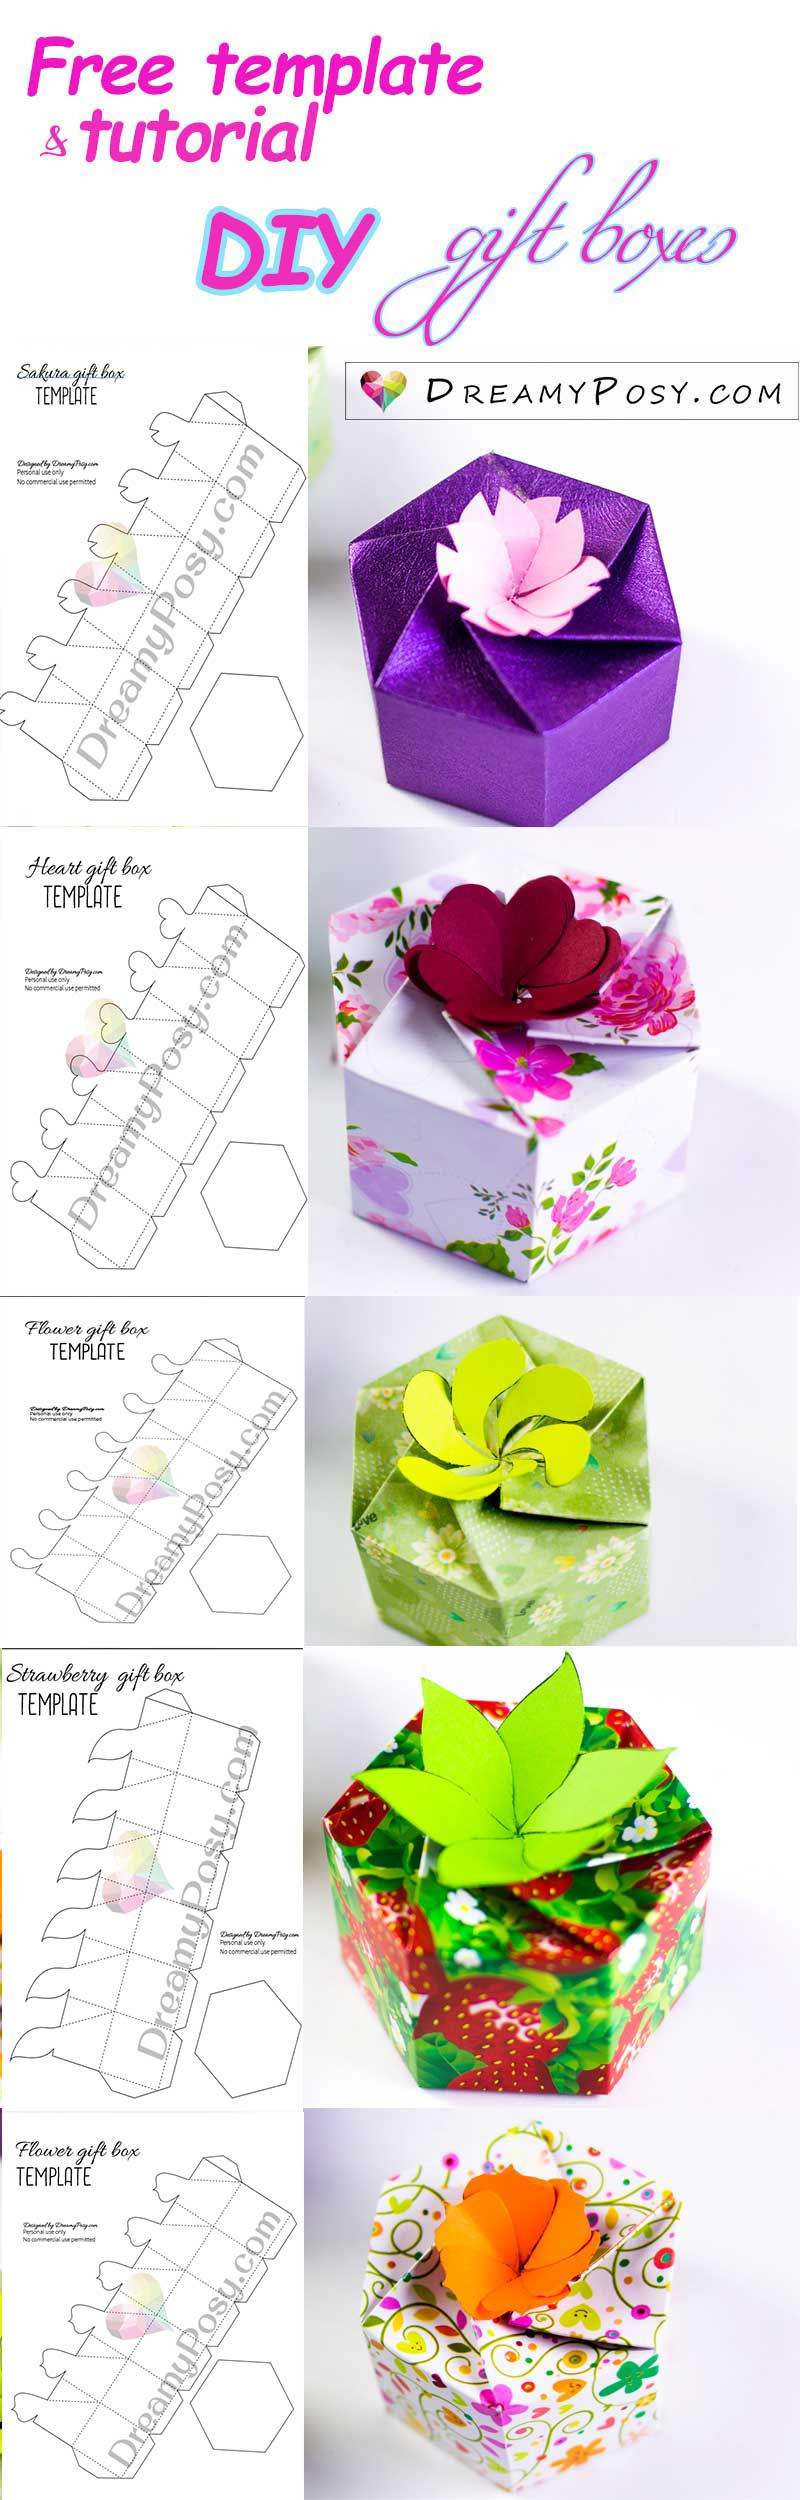 DIY Gift Box Templates
 How to make personalized t boxes free template